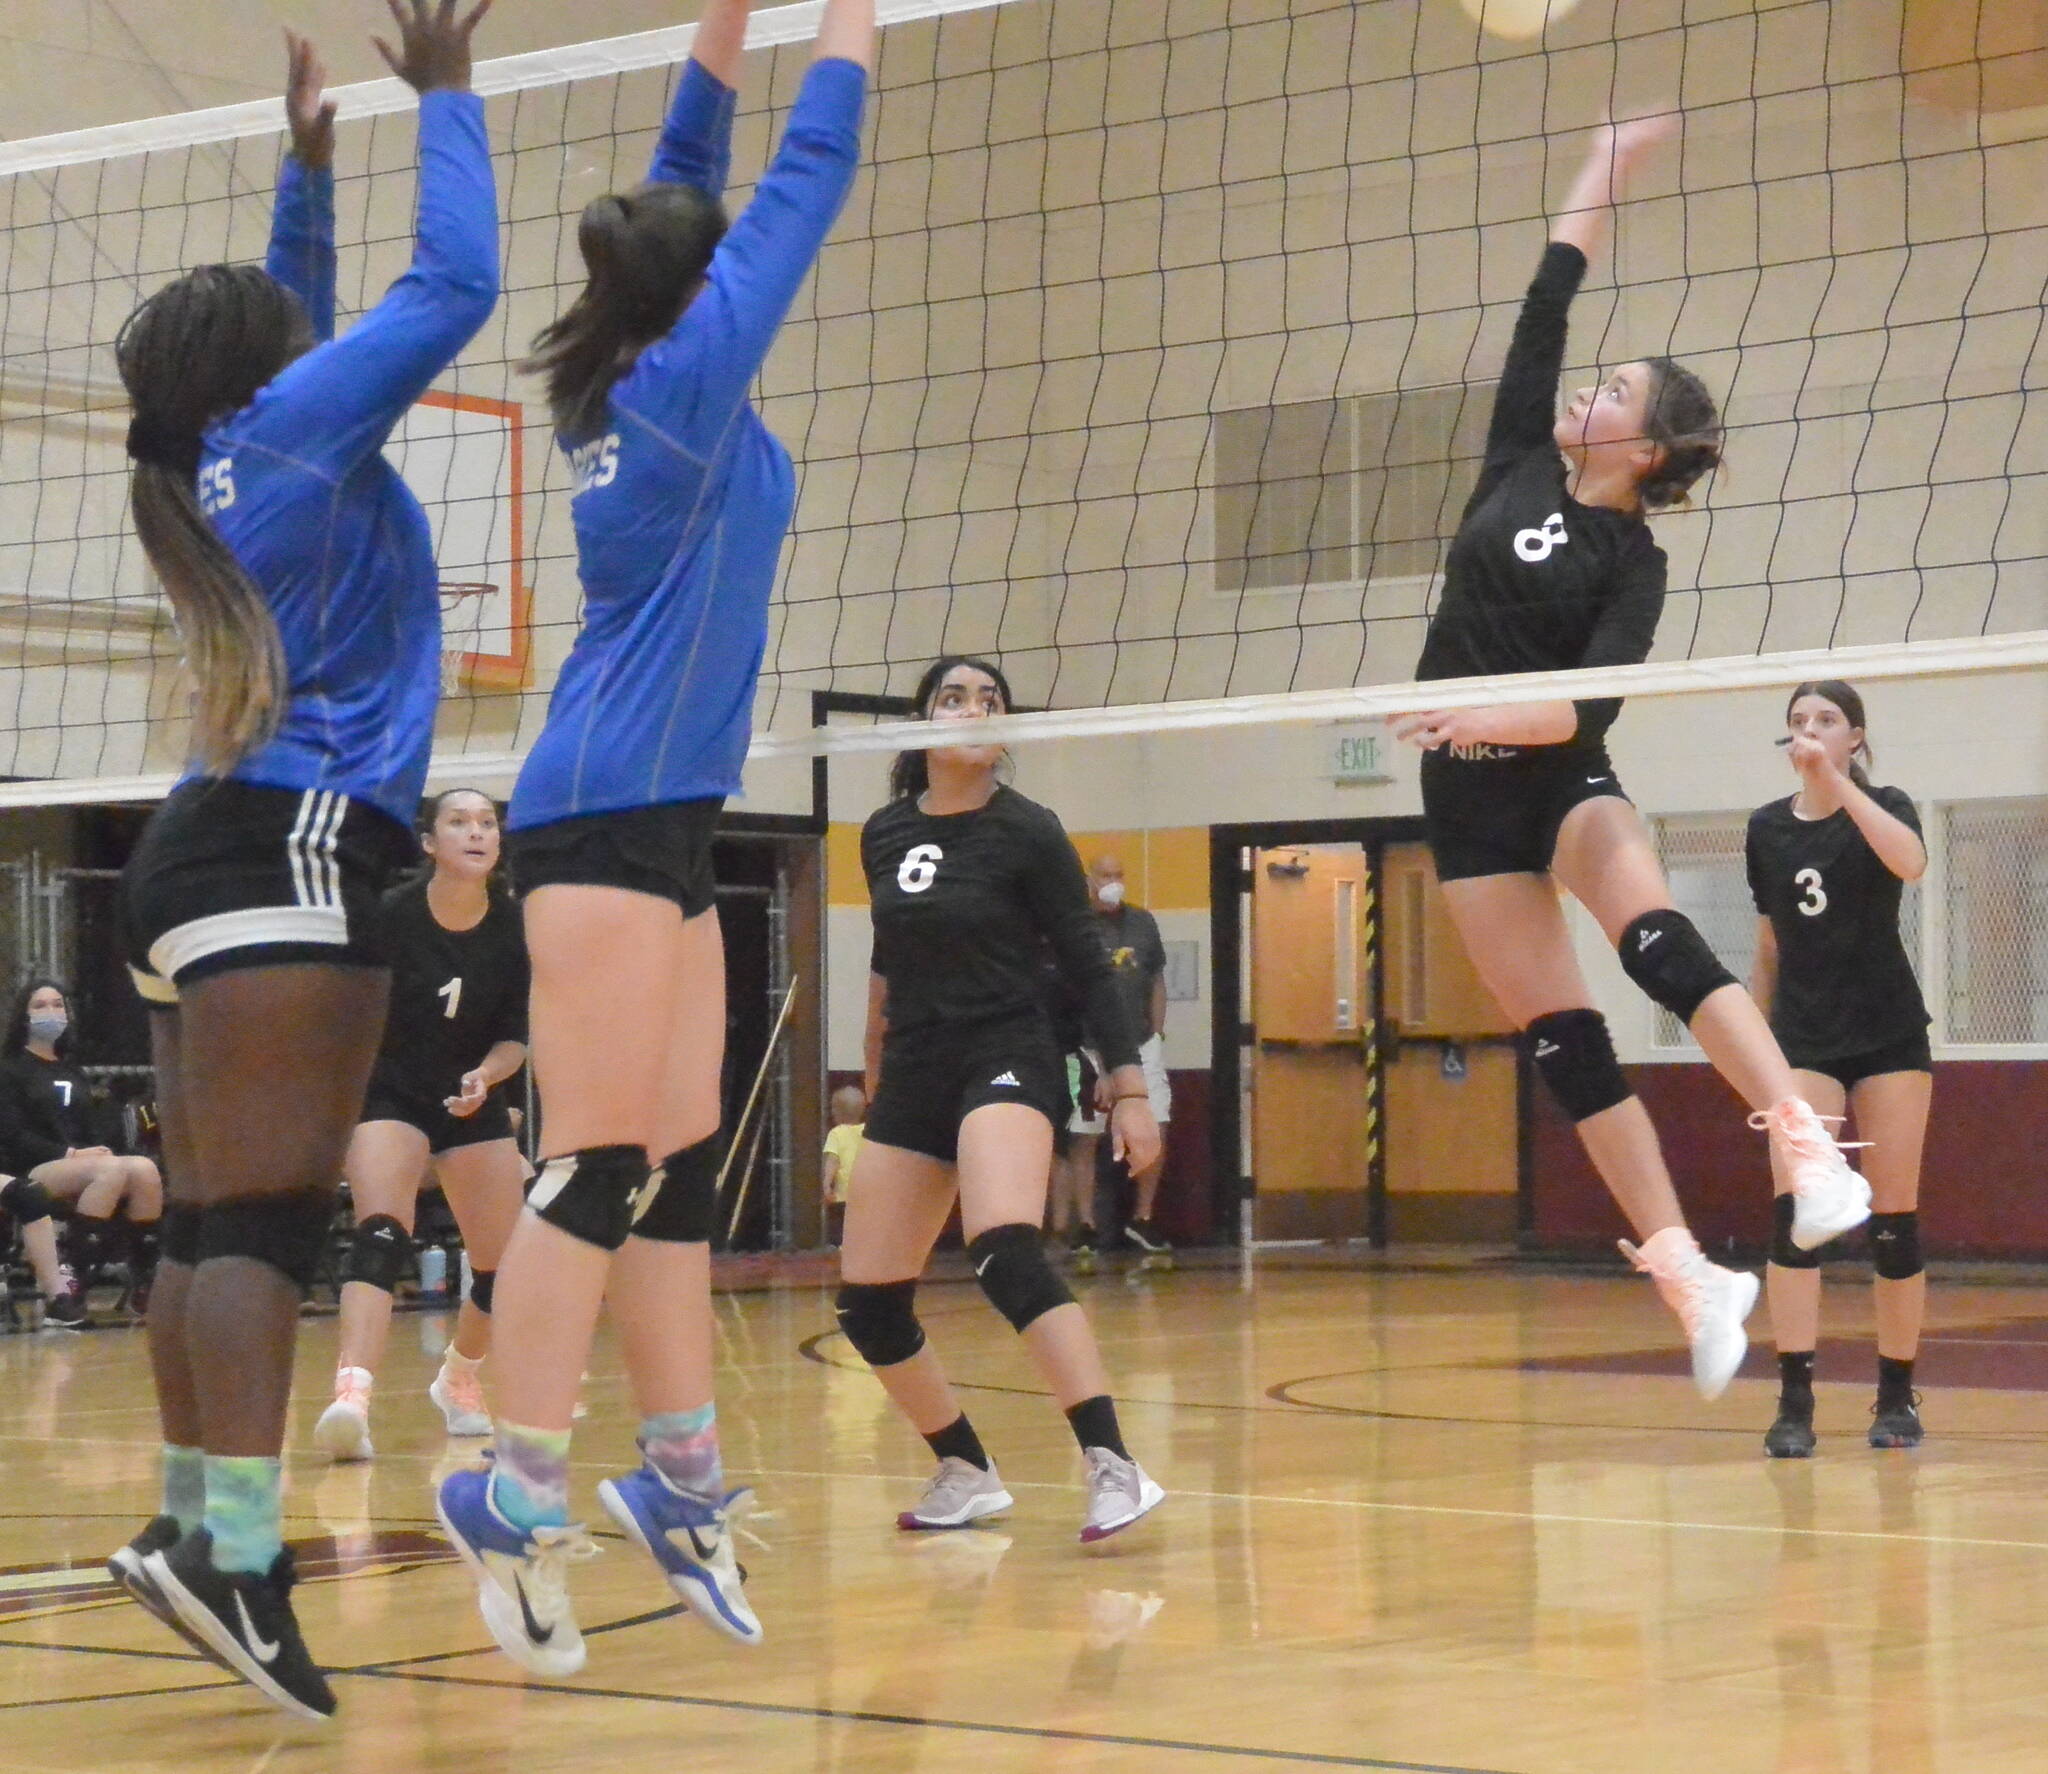 Gene Helfman photo/Jamie Armstrong (#8) spikes the ball as Sophie Allen (1), Valentina Rendon (6), and Camille Steckler (3) look on in the match against Grace Academy, Sept. 13.